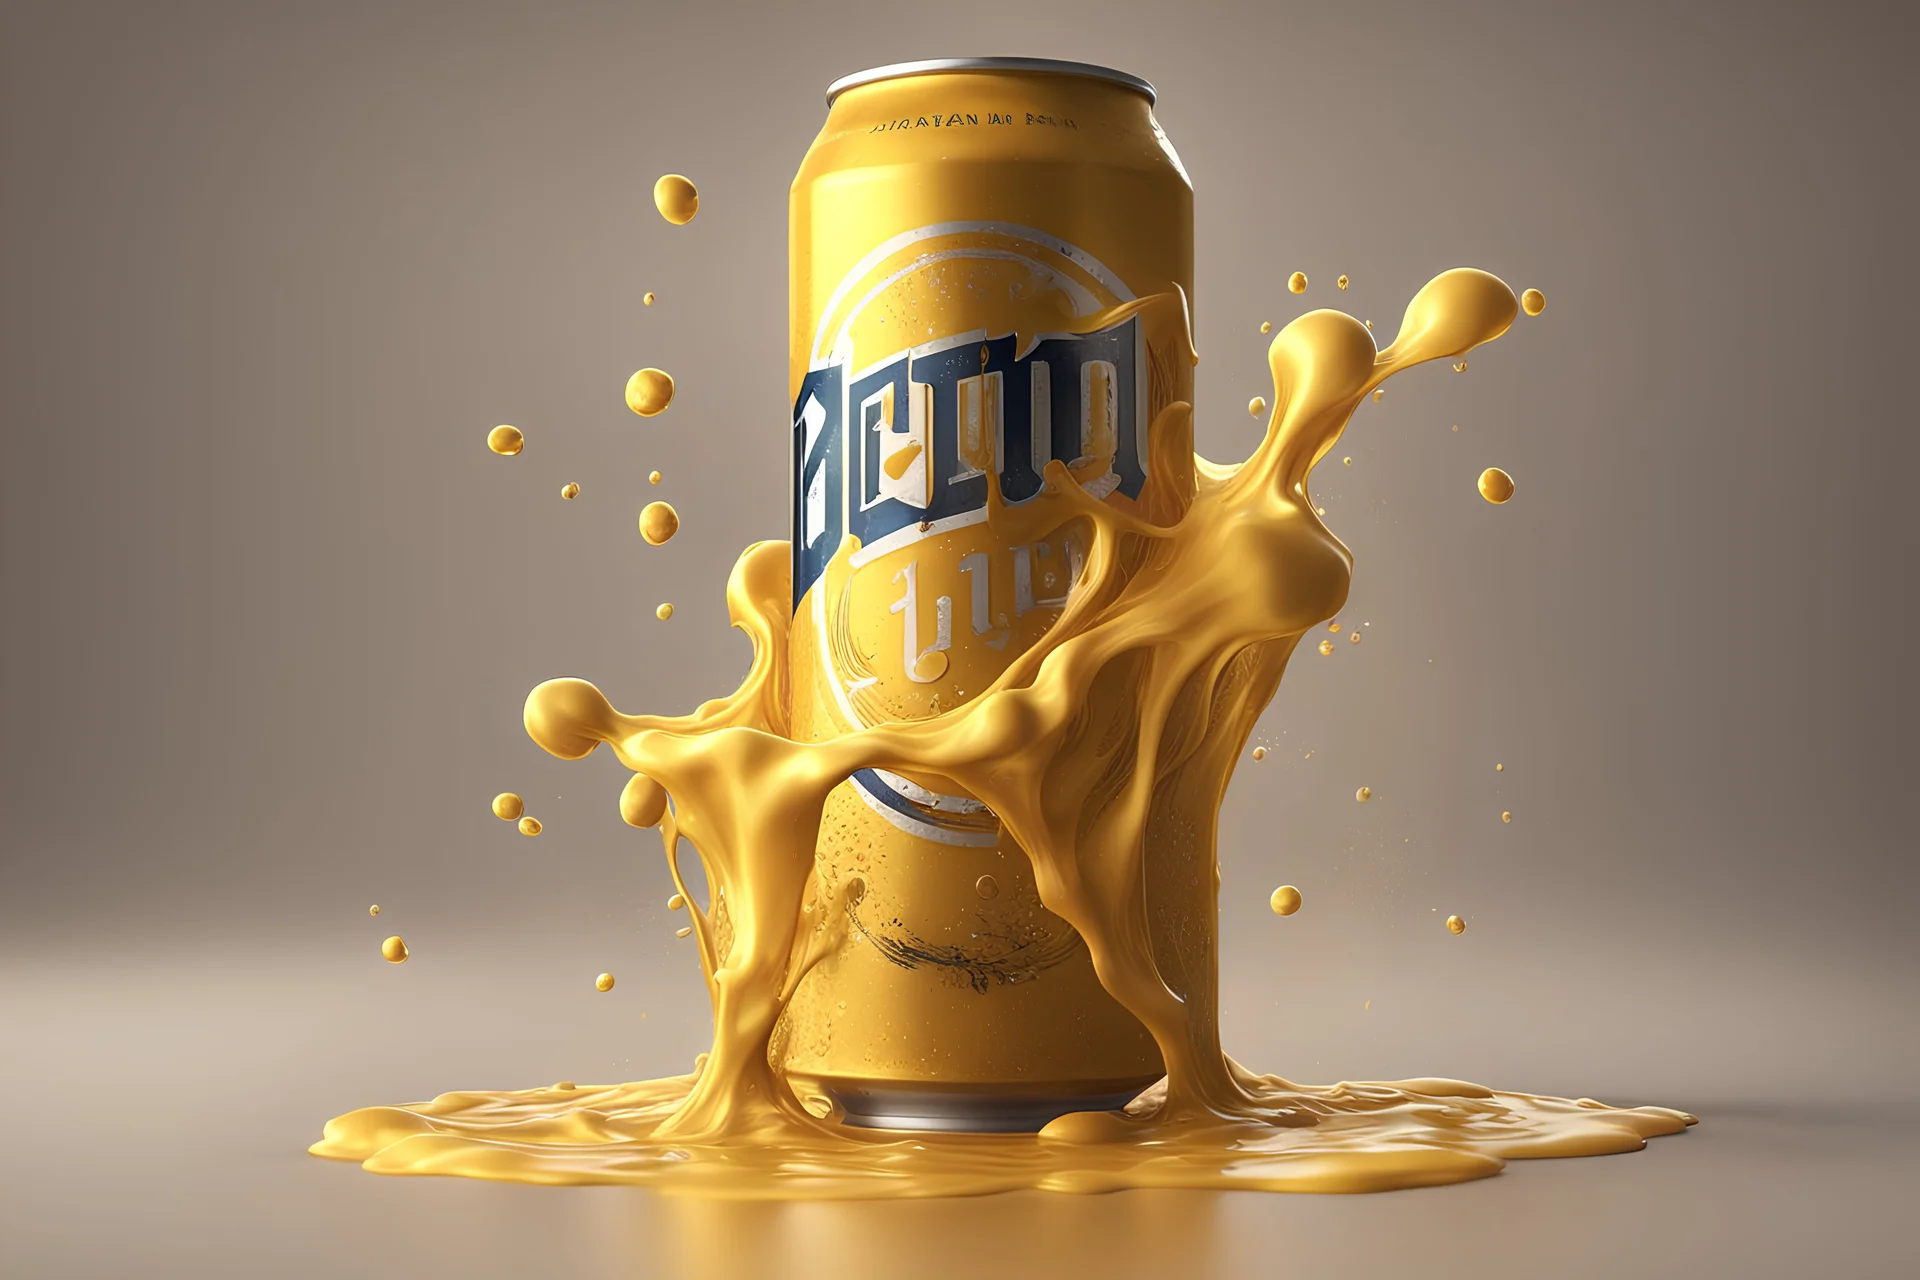 gloomy image of a beer can dumping a yellow liquid beer foams air-bubbles spilling and melting down from it ,in the style of nathan durfeem, smooth 3d digital art, exquisite thee-dimensional rendering, 4K, blender, c4d, octane render , disney style 3d light, Zbrush sculpt, concept art, Zbrush high detail, pinterest Creature Zbrush HD sculpt, neutral lighting, 8k detail